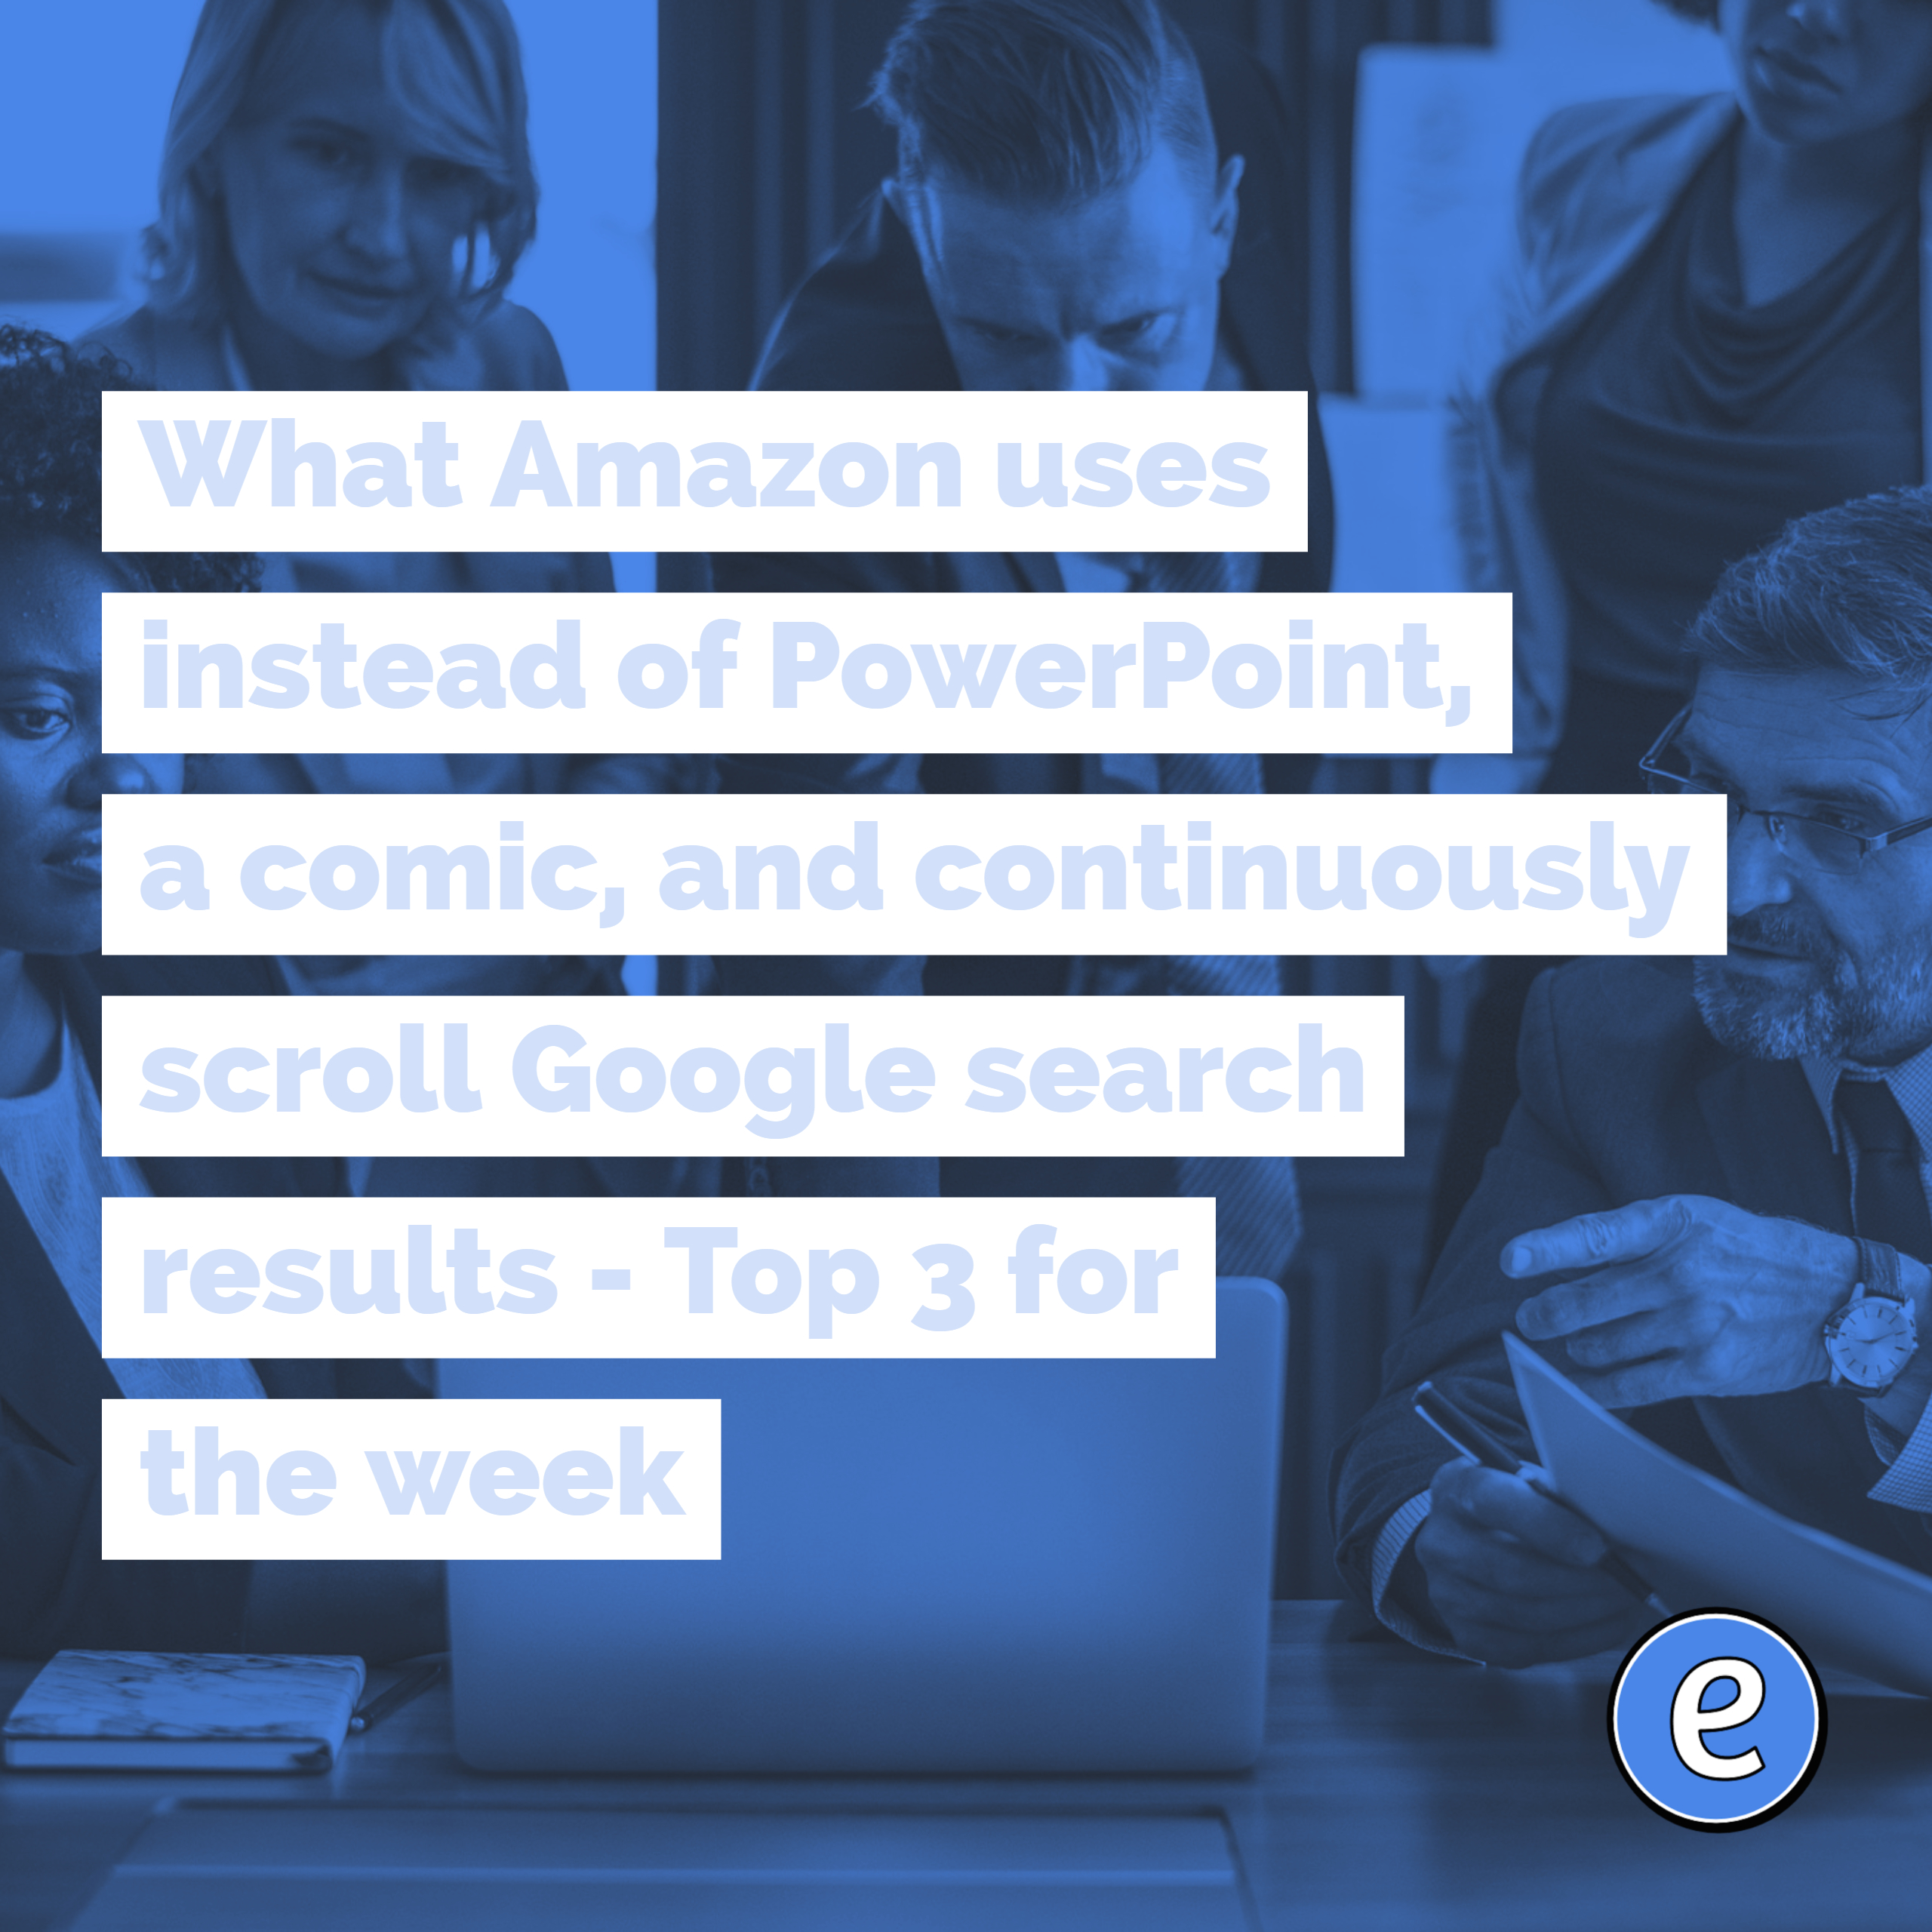 What Amazon uses instead of PowerPoint, a comic, and continuously scroll Google search results – Top 3 for the week